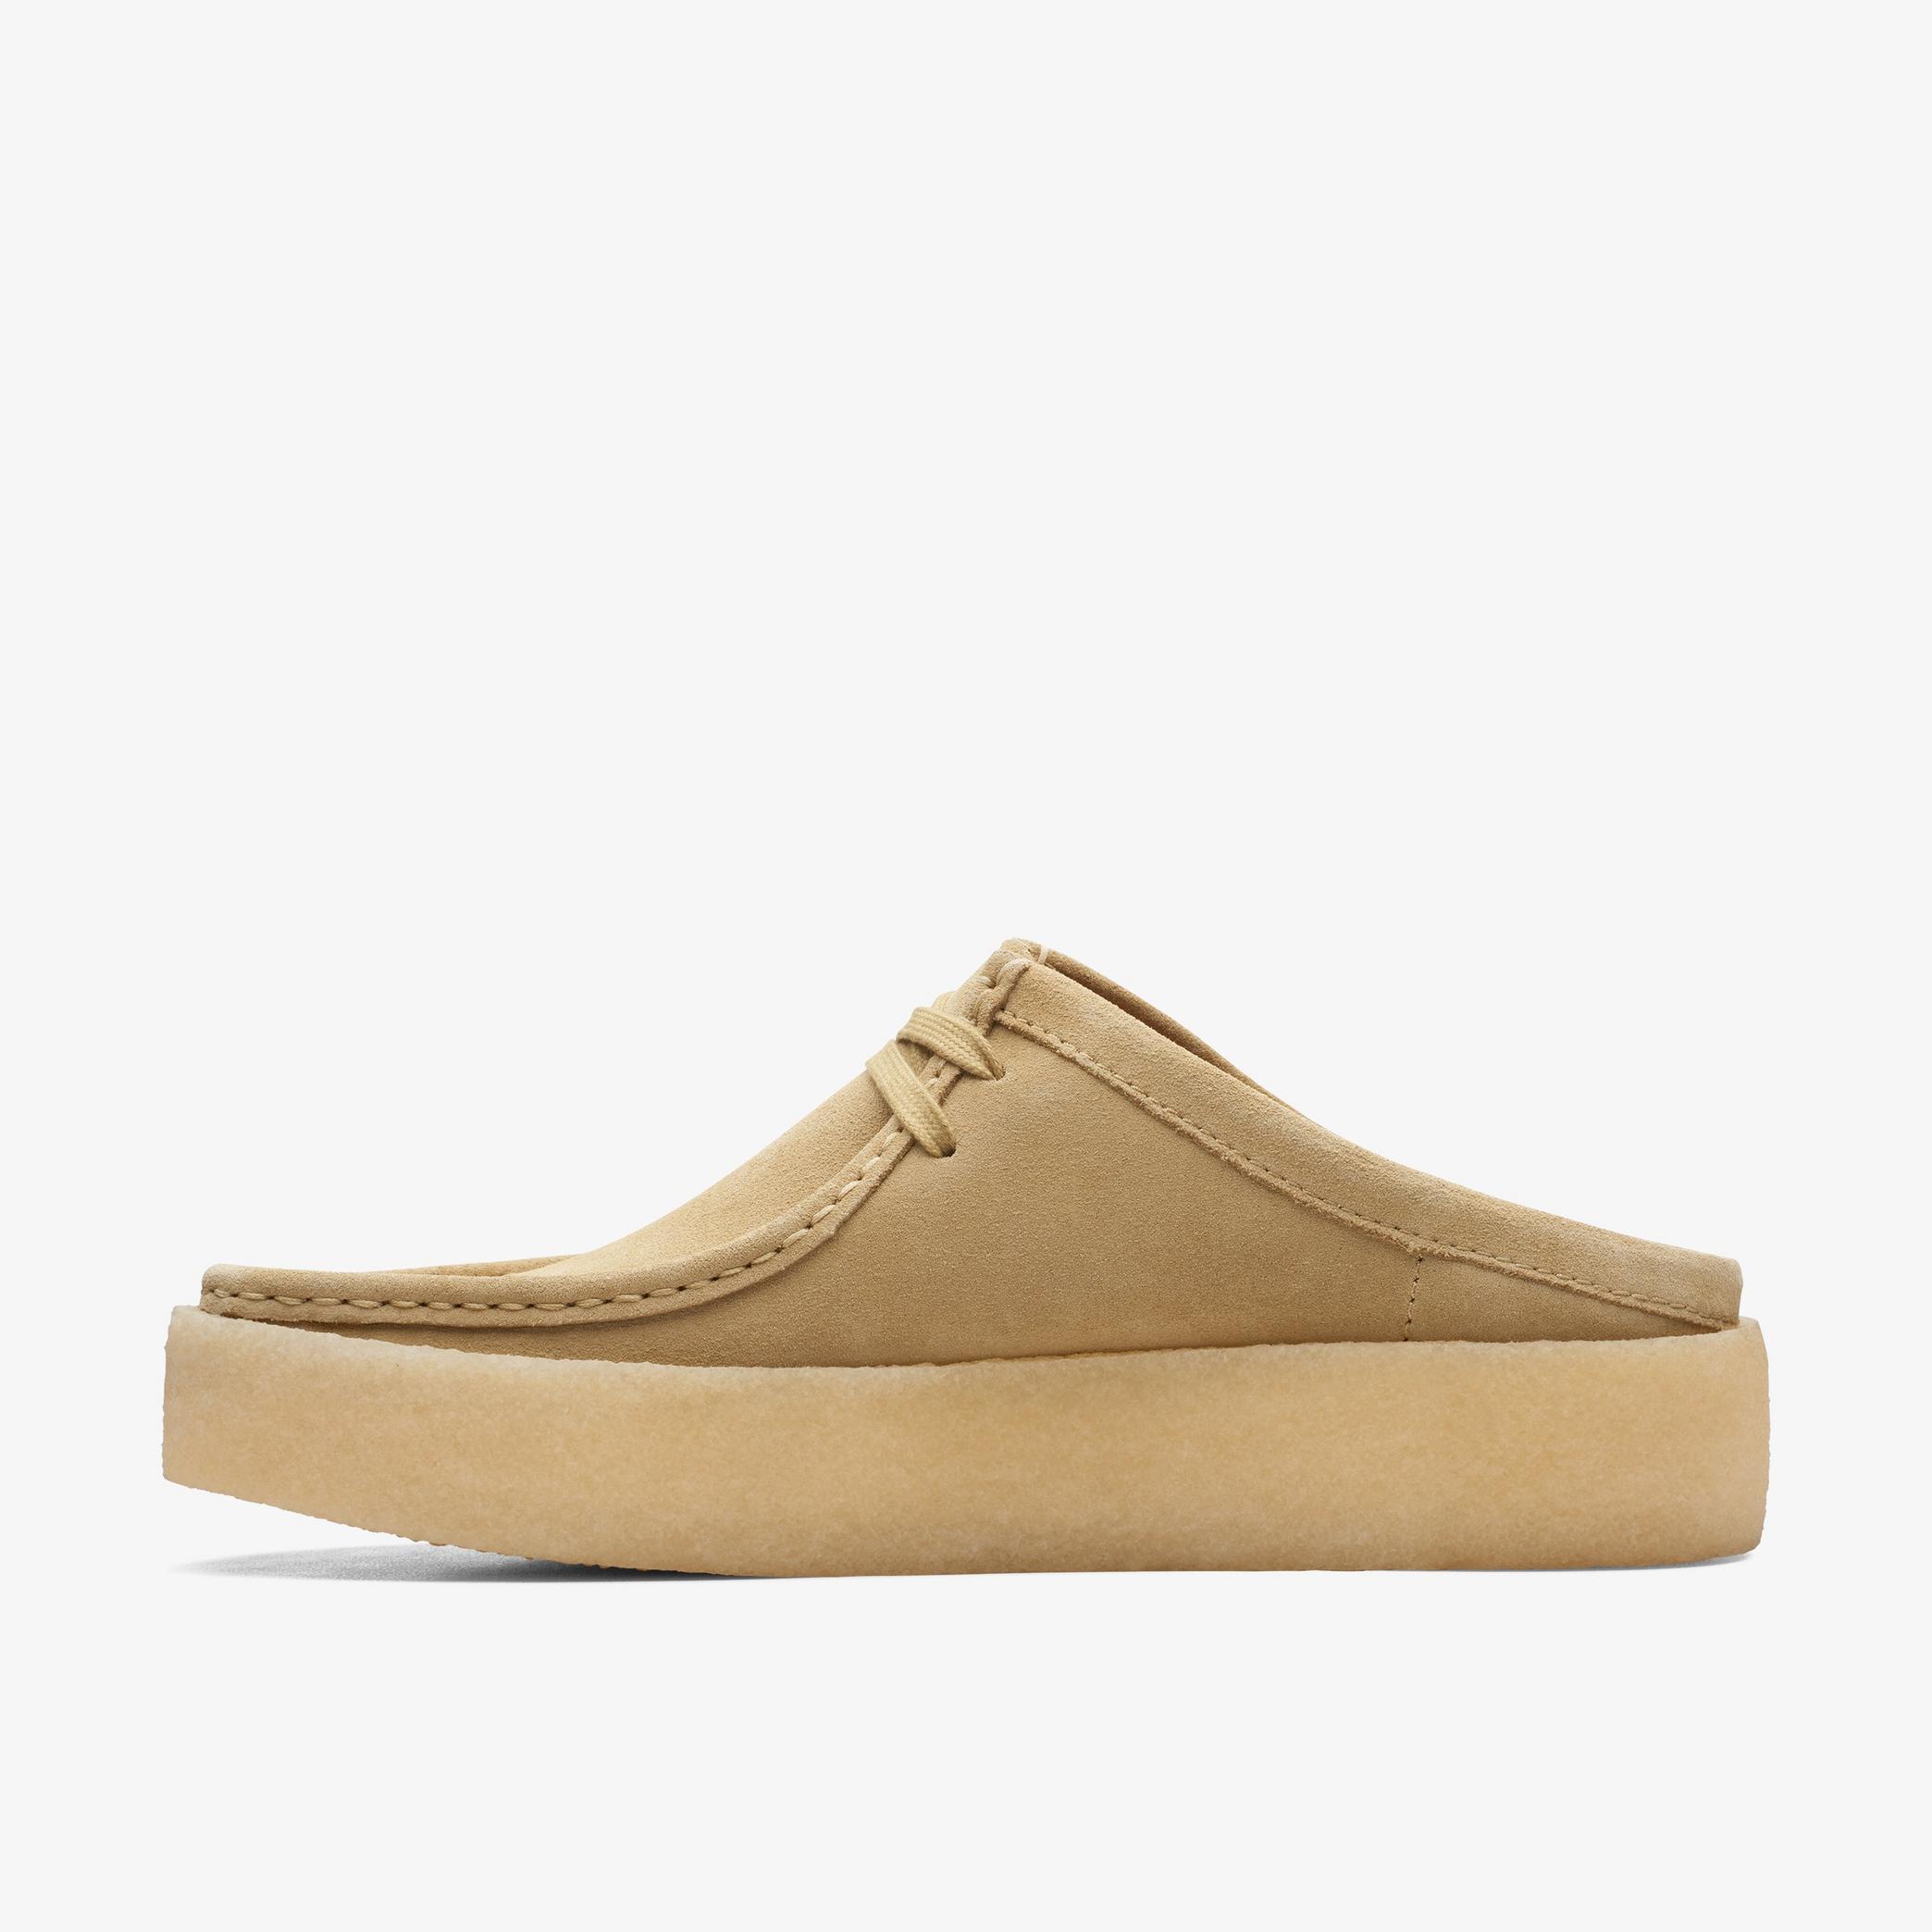 Wallabee Cup Lo Maple Suede Shoes, view 2 of 6